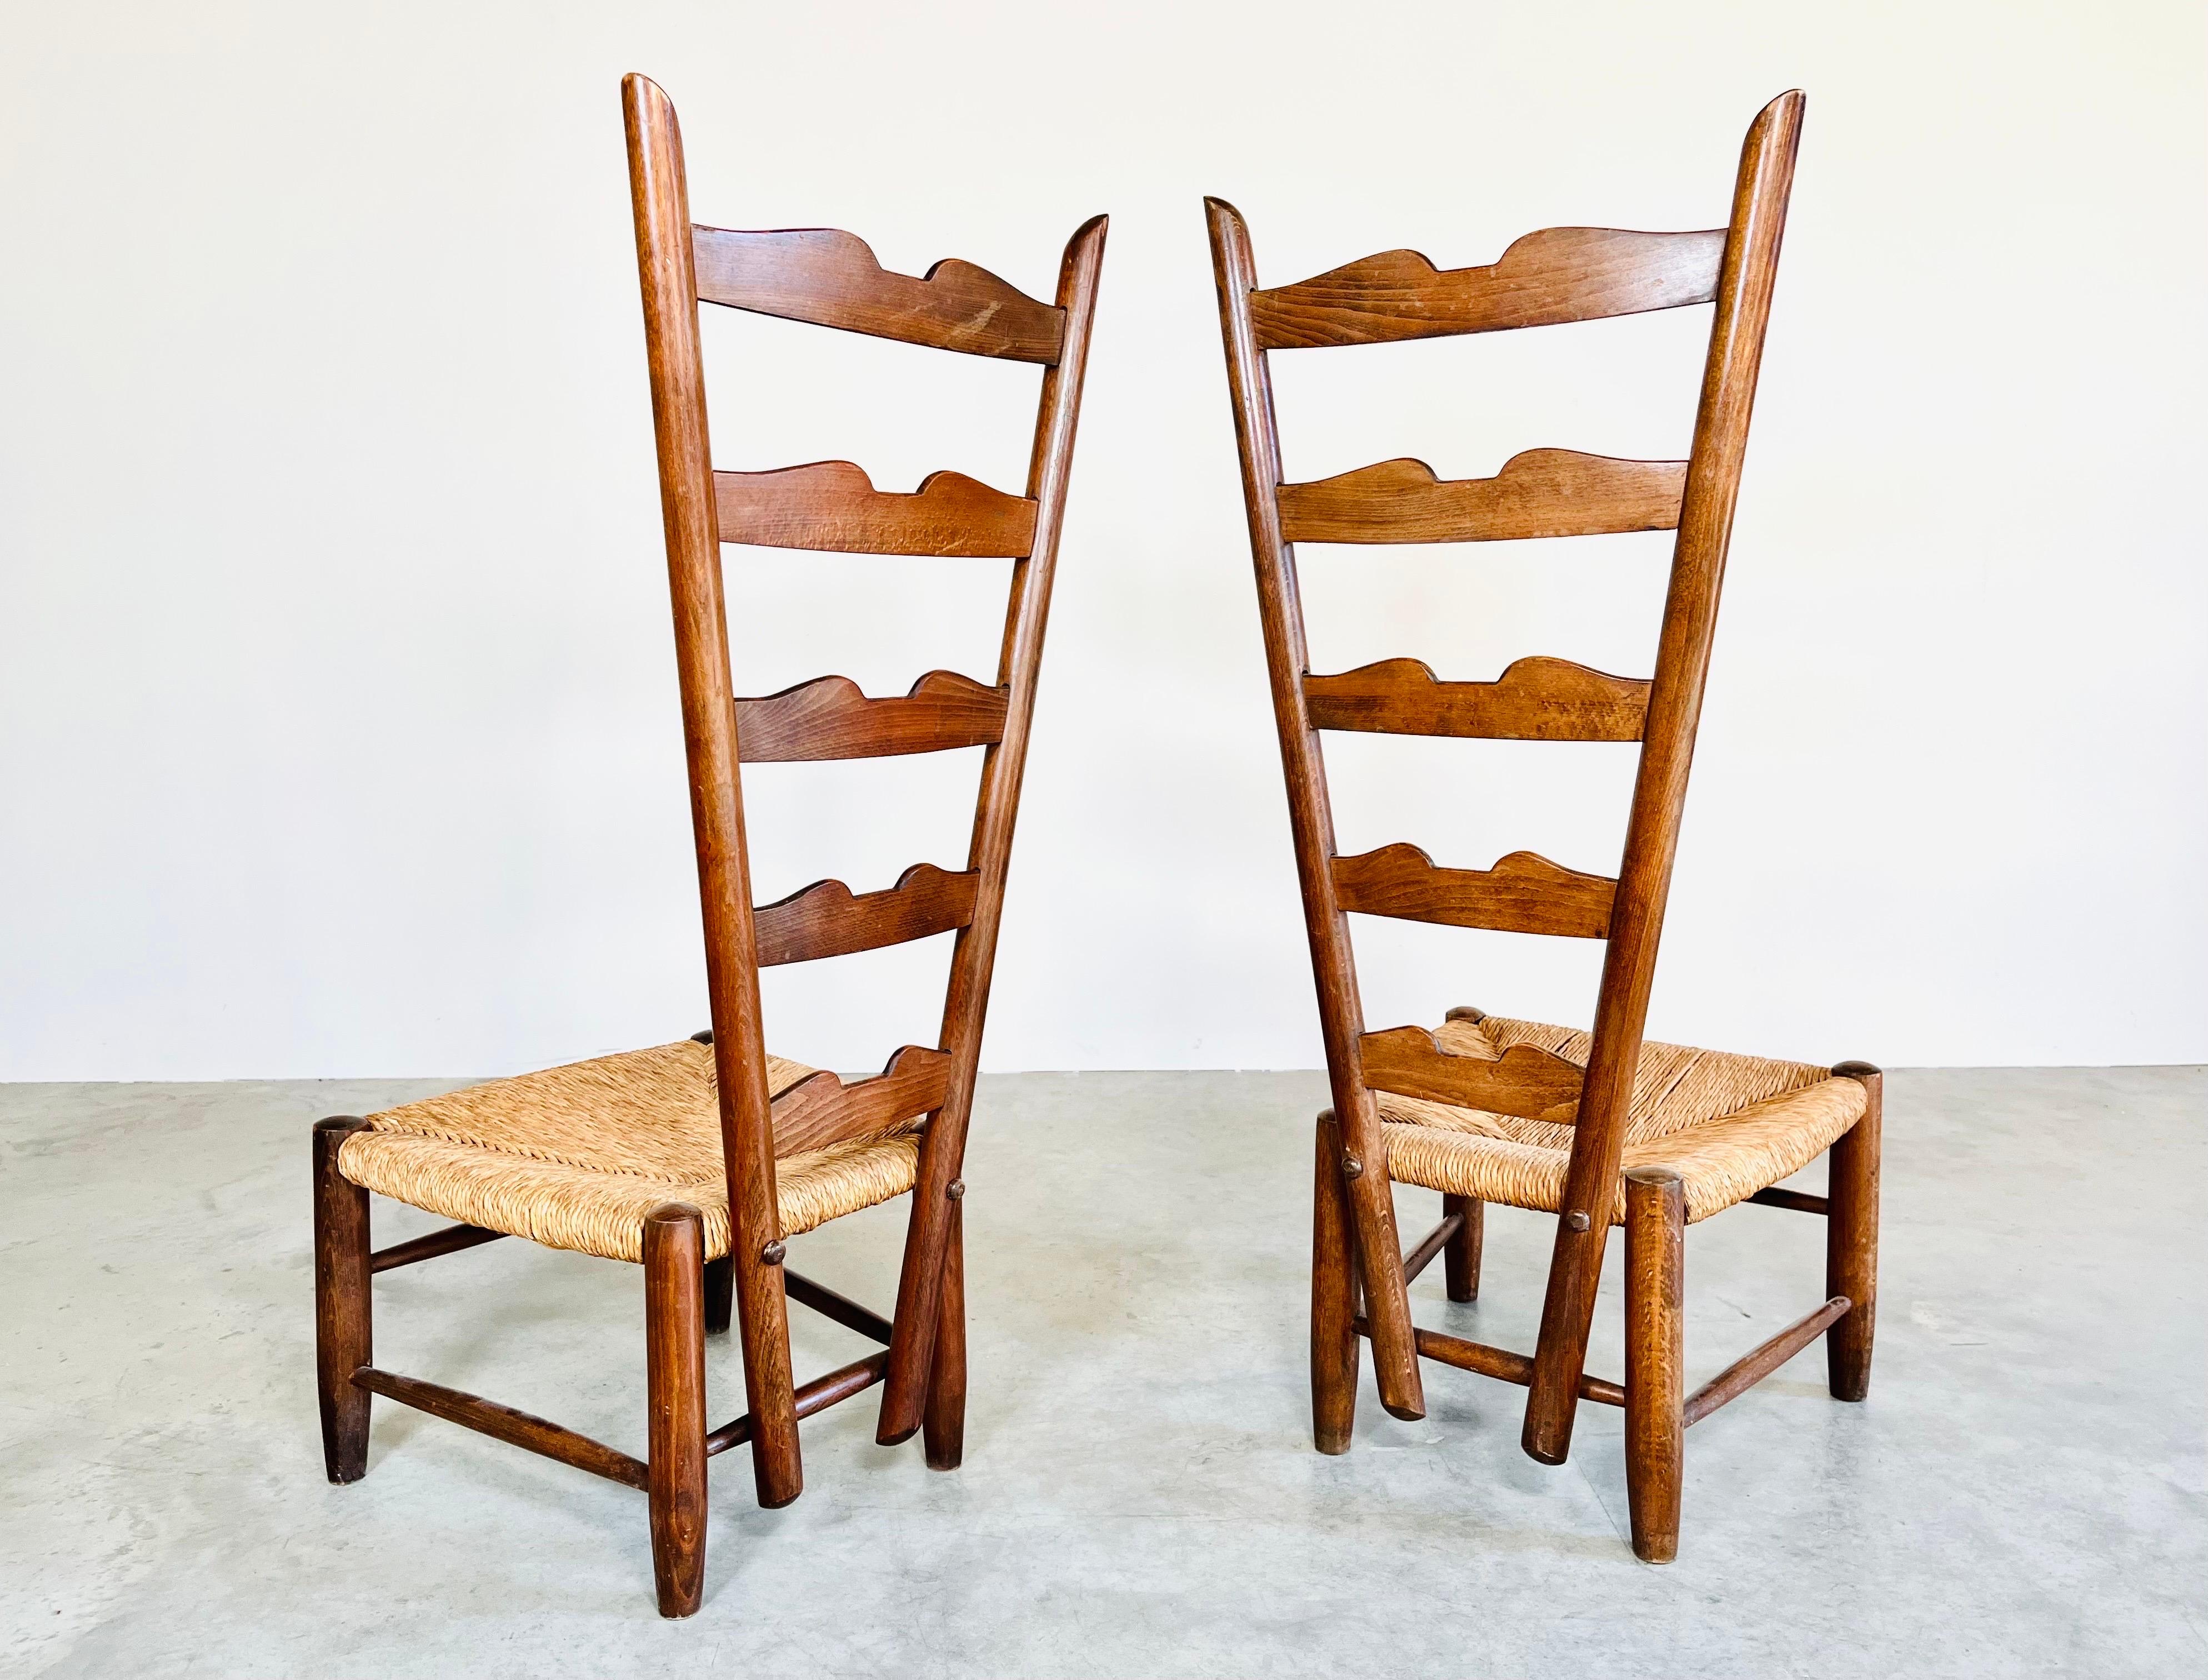 Italian Gio Ponti Ladder Back Fireside Chairs in Exceptional Walnut